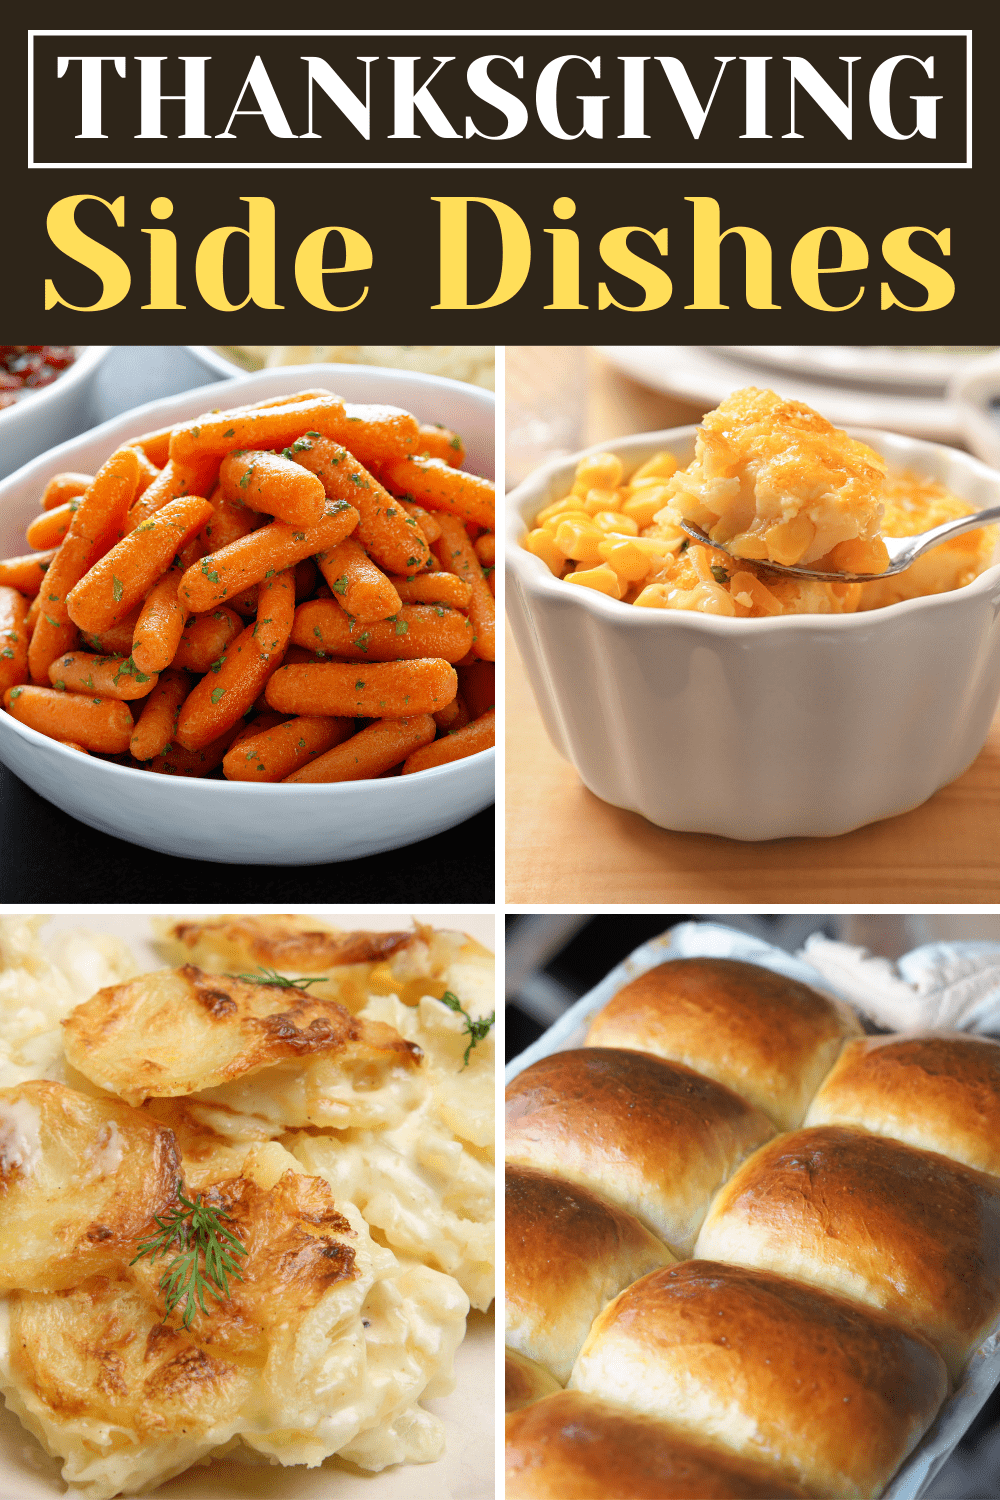 15 Thanksgiving Side Dishes (+ Easy Recipes) - Insanely Good